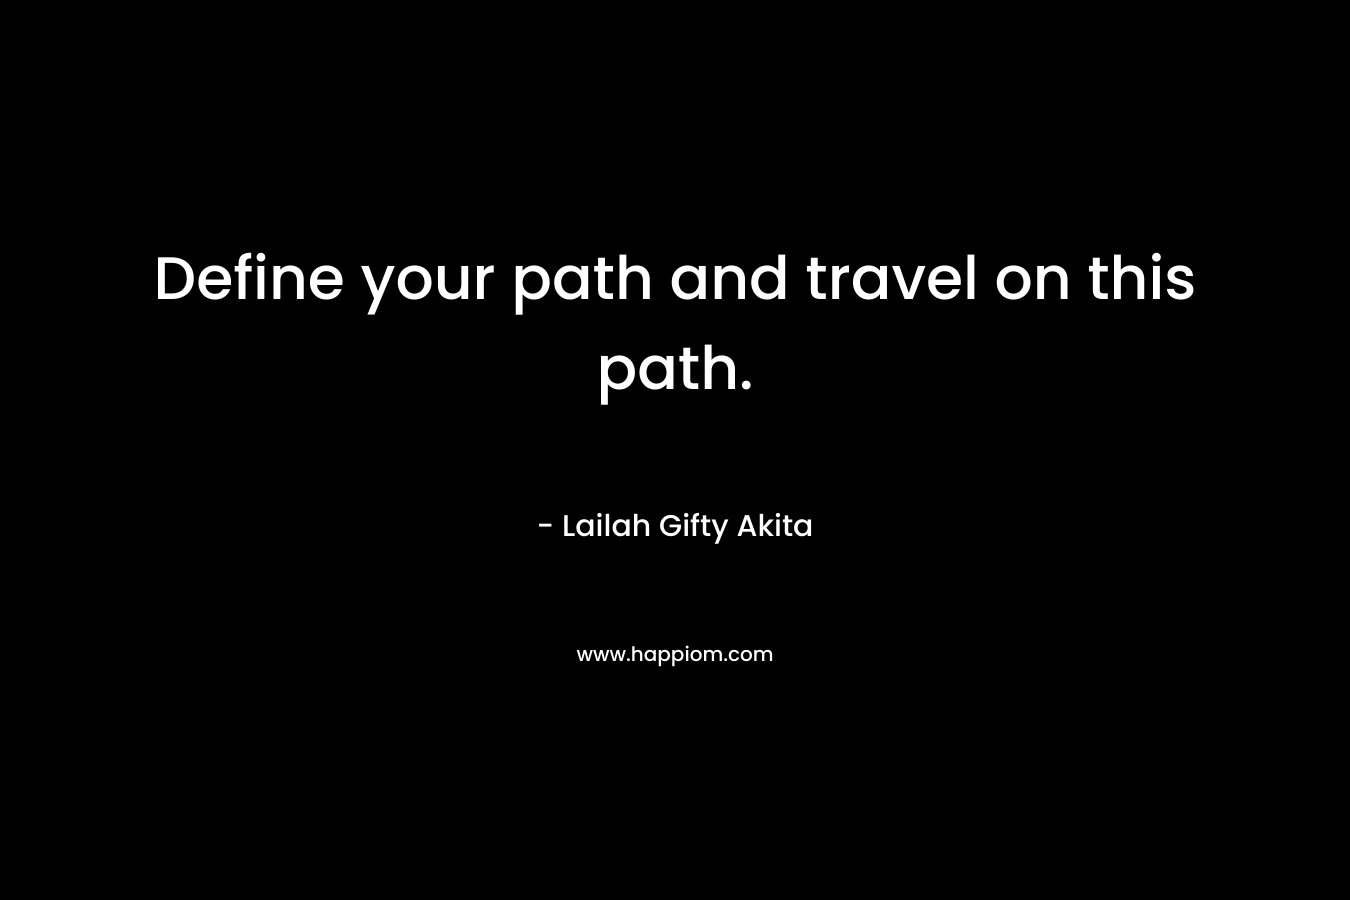 Define your path and travel on this path.